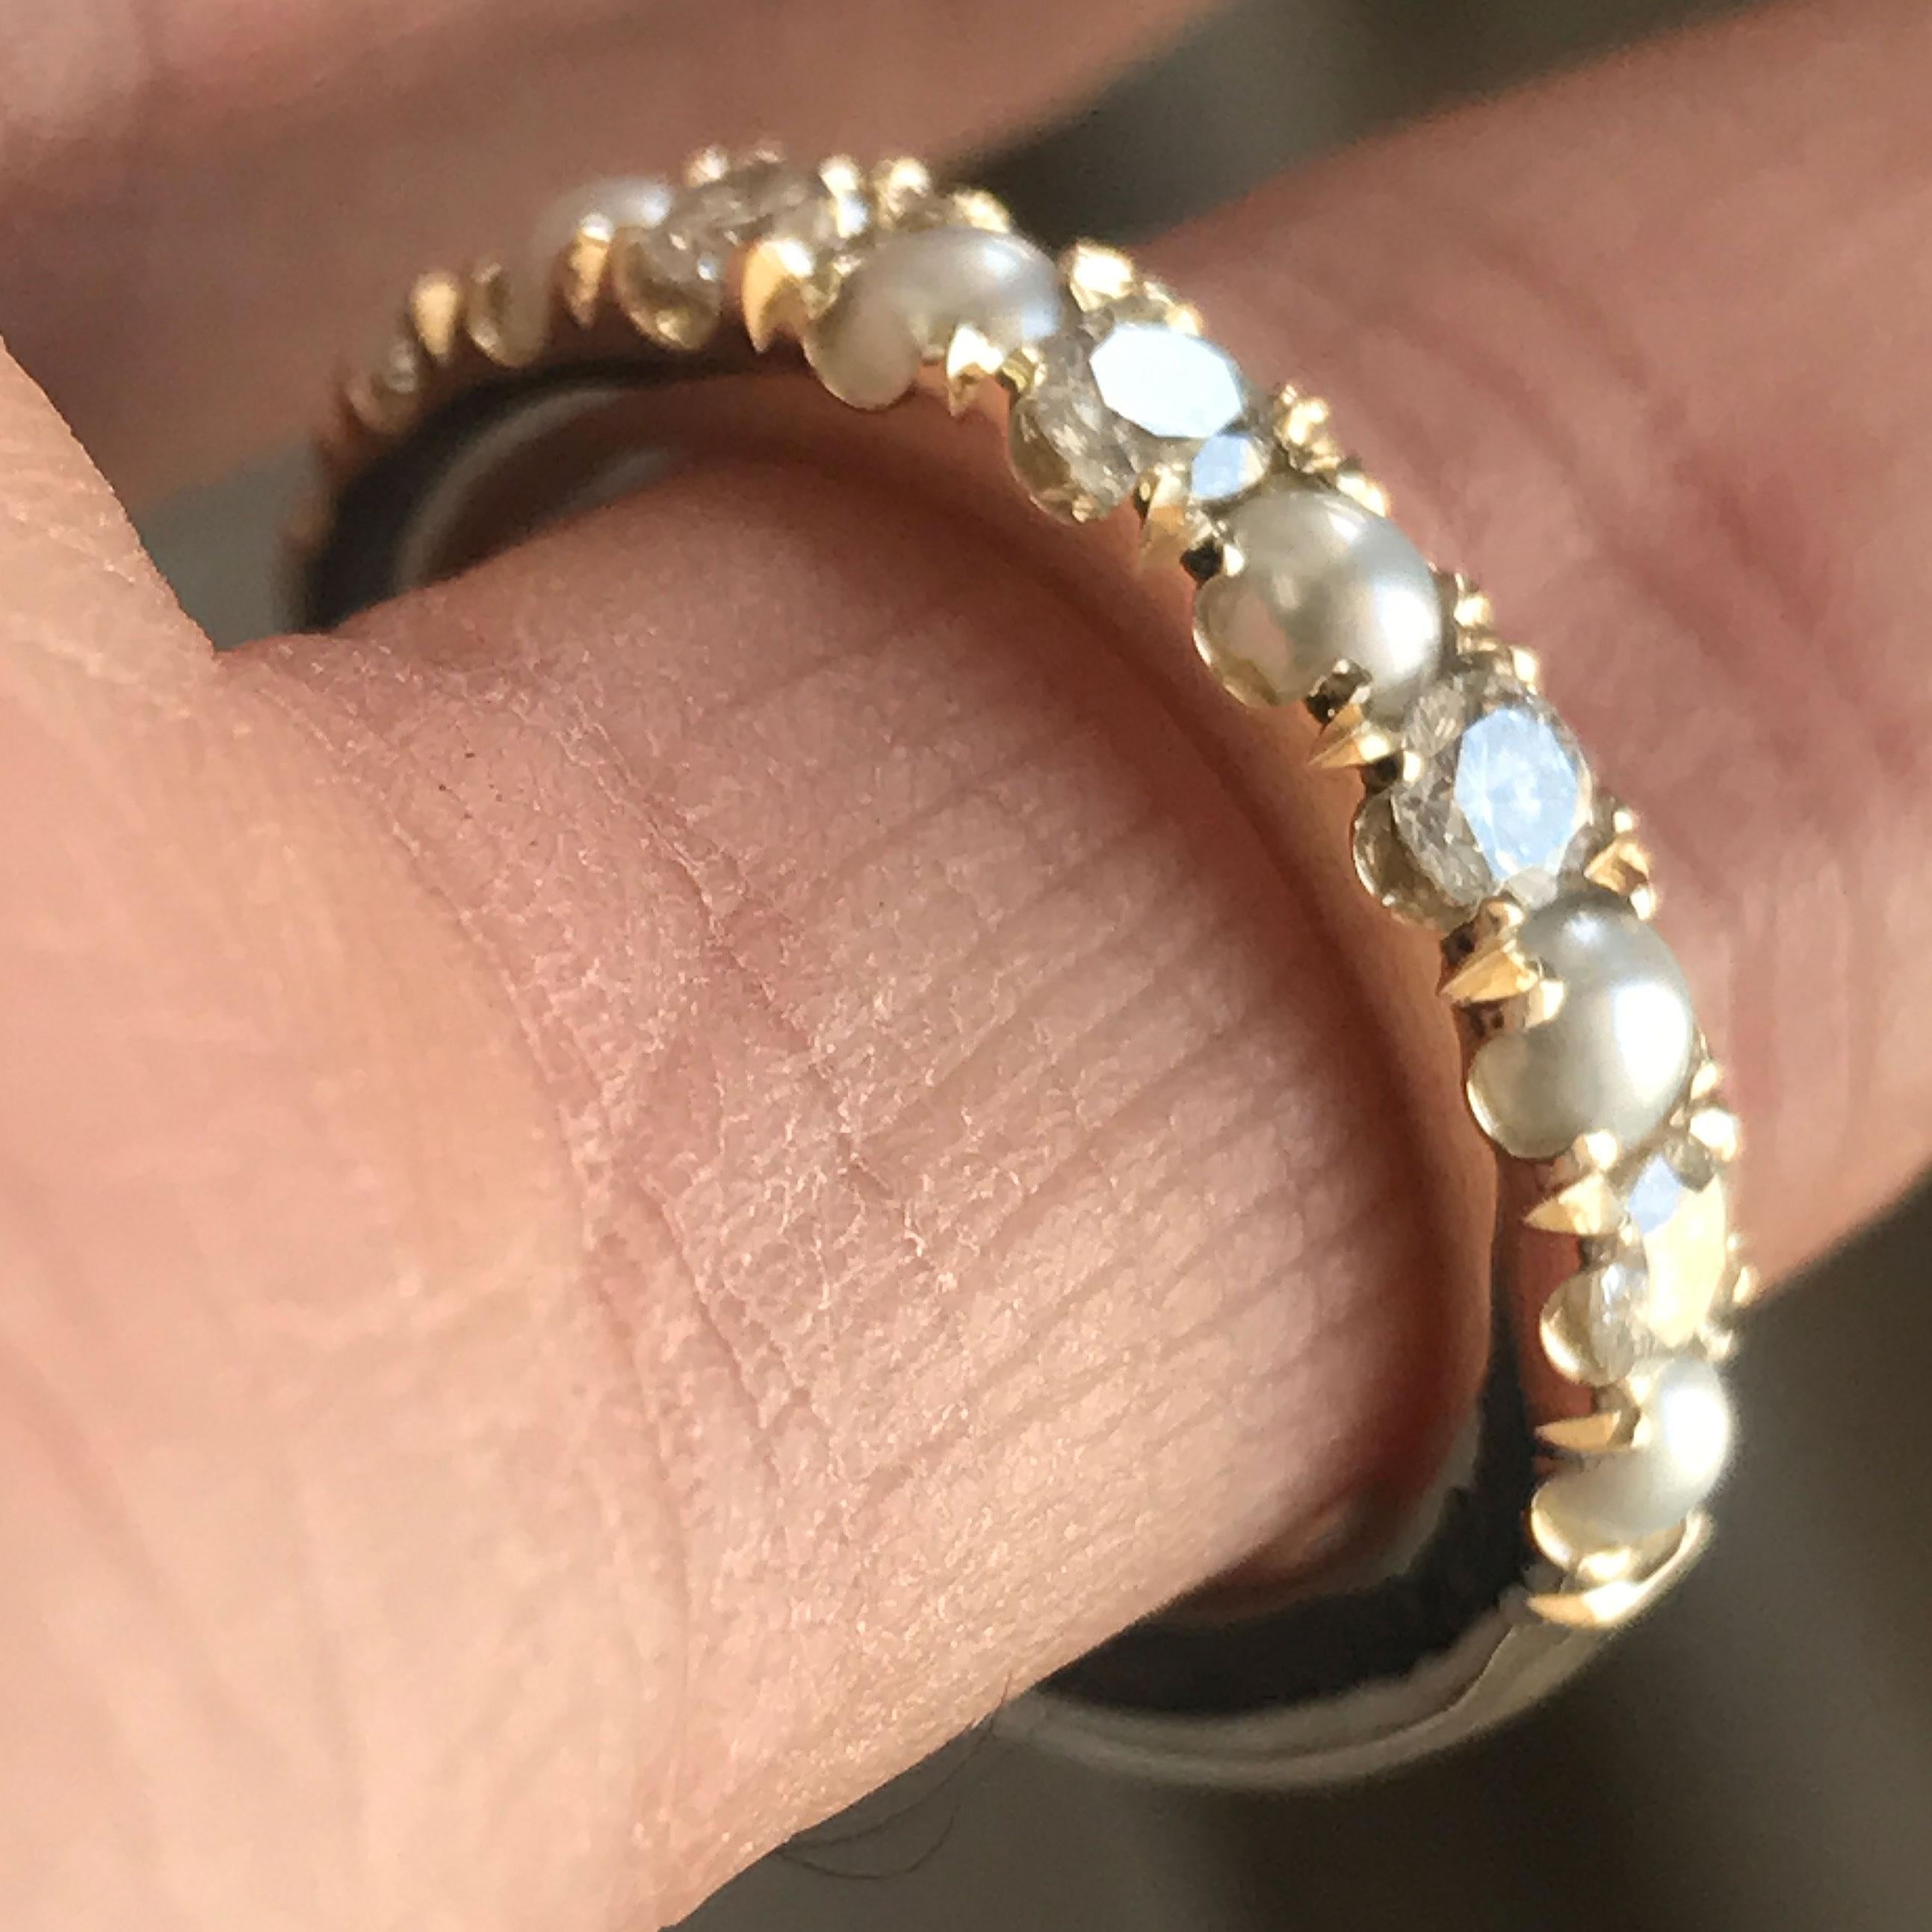 Made to order, please allow 2-5 weeks.
 
Round Set Diamond Wedding / Eternity Band 0.60 CTW F-H Color VS - SI Clarity

4 Perfectly Set Diamonds 3.0 mm each, 3 Half Pearl 3.00 mm each
White natural diamonds no treatment (F-H Color VS-SI